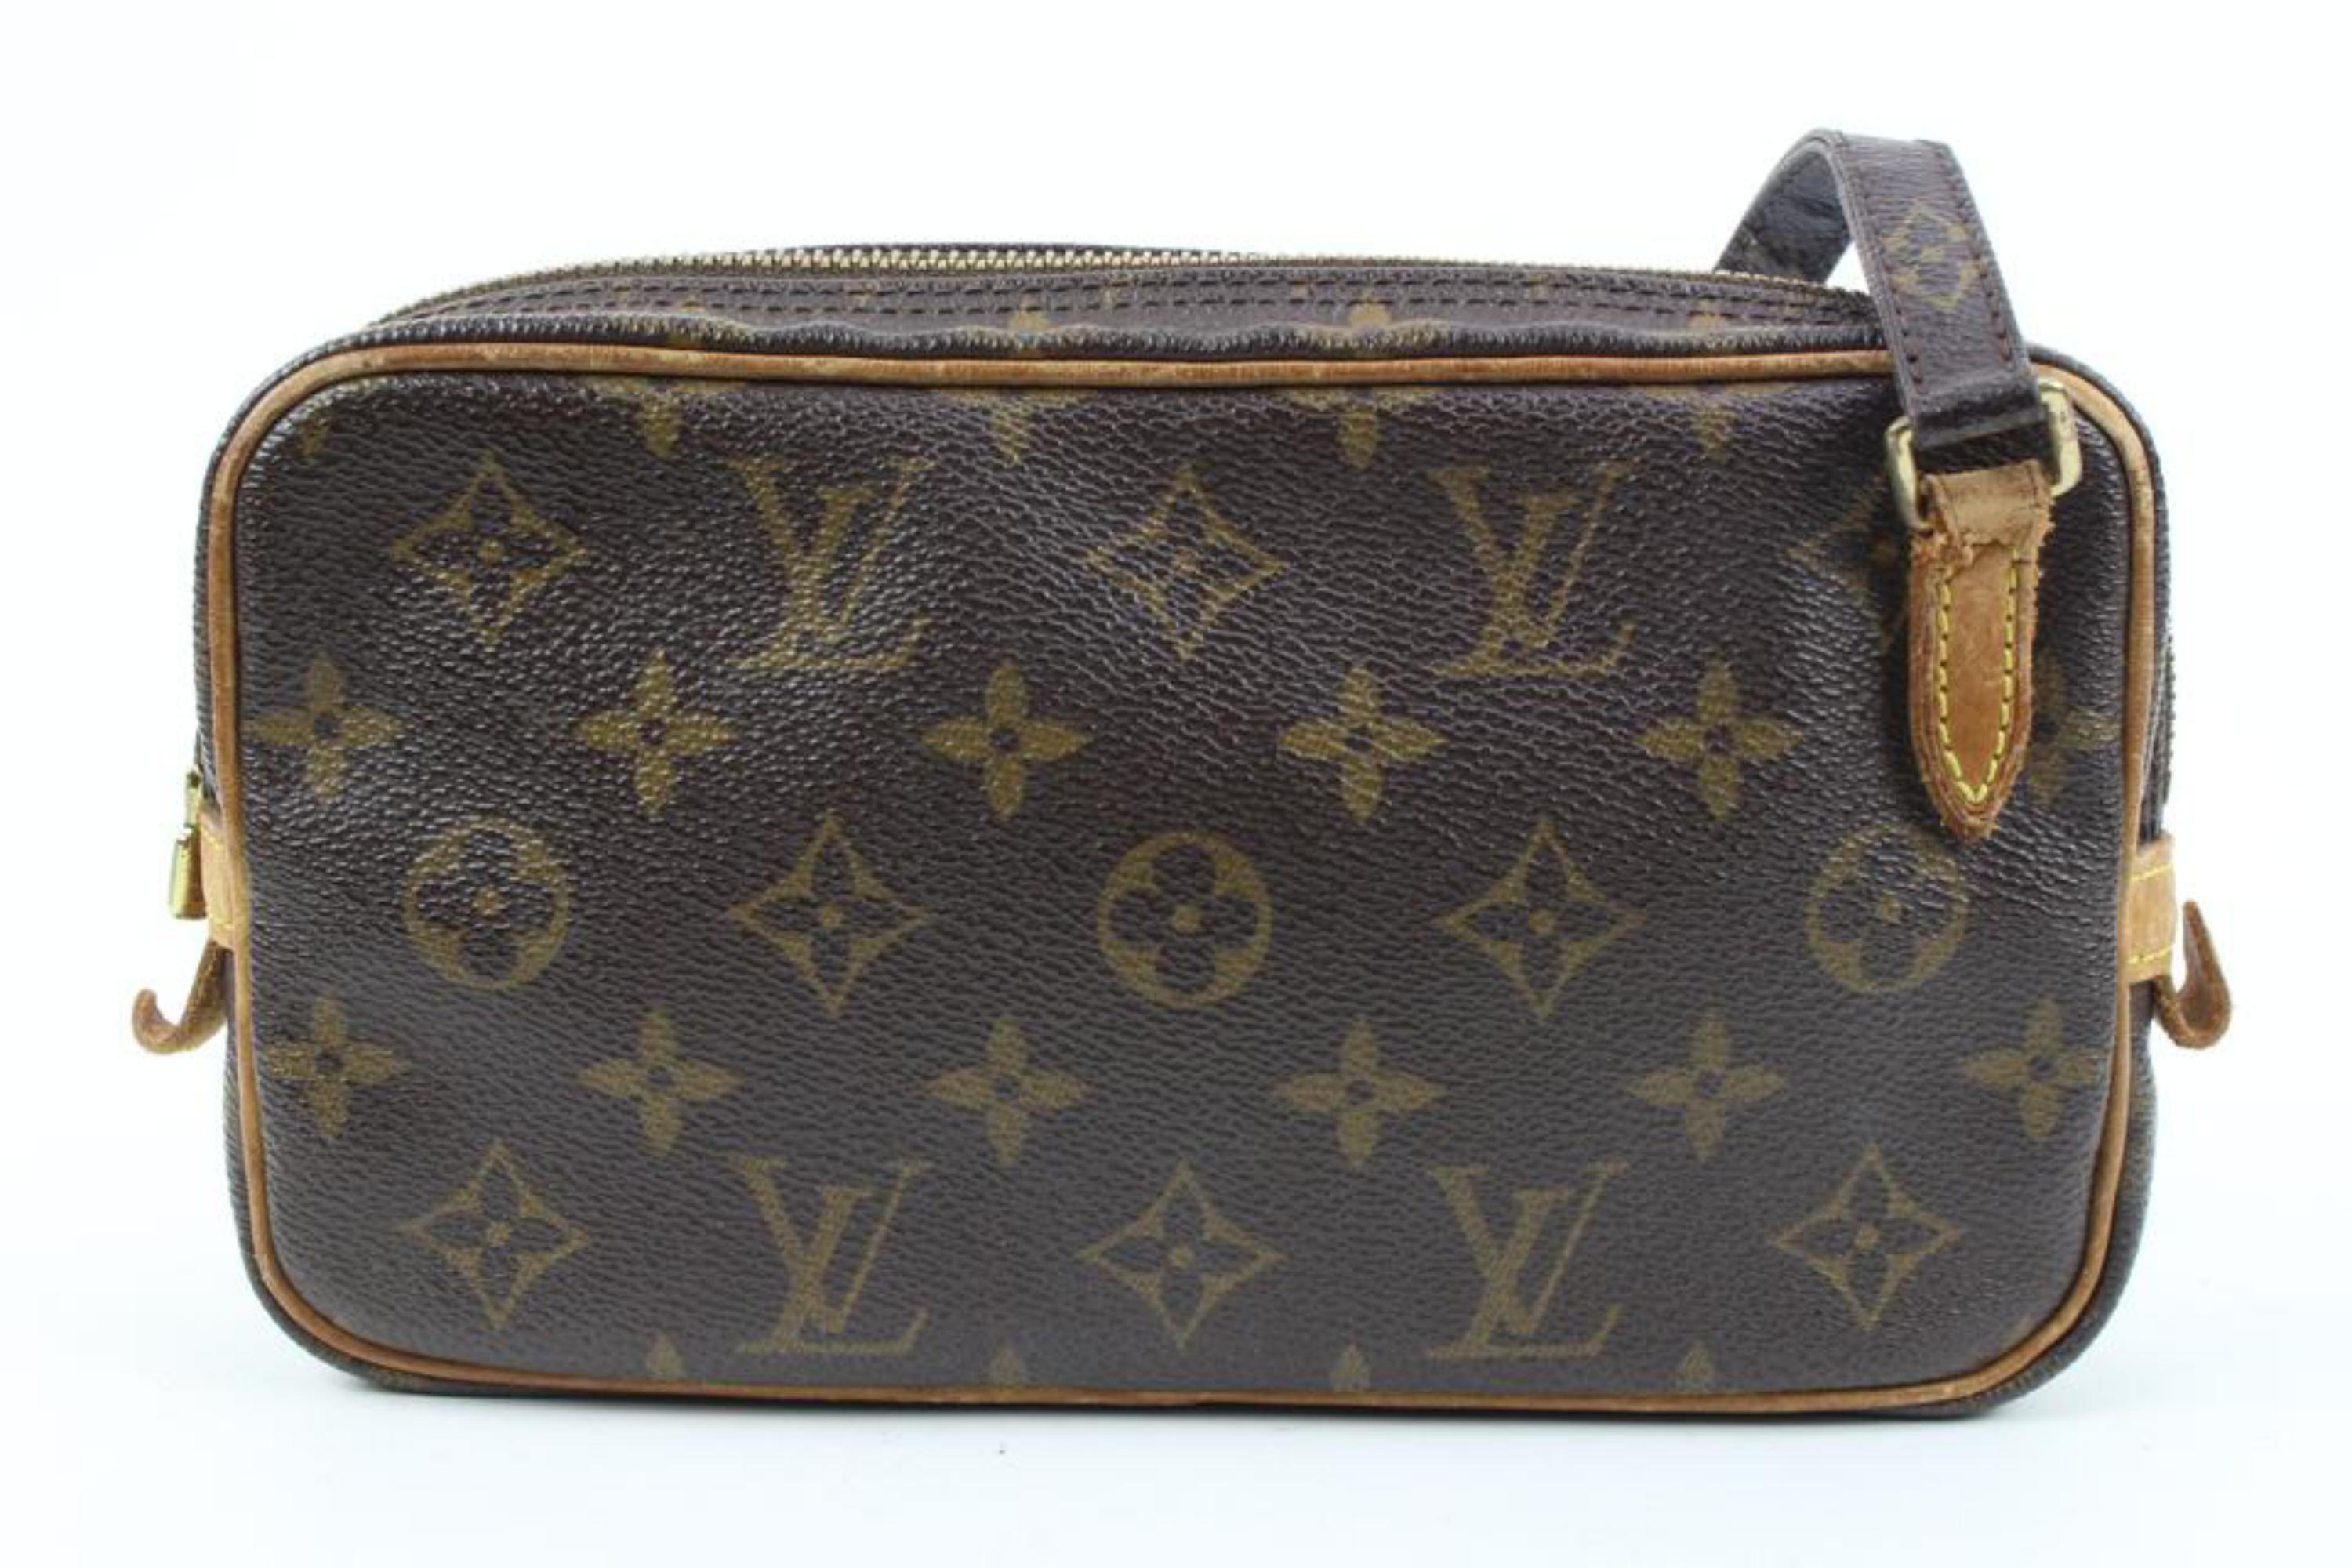 Louis Vuitton Monogram Pochette Marly Bandouliere Crossbody Bag 121lv58 In Good Condition For Sale In Dix hills, NY